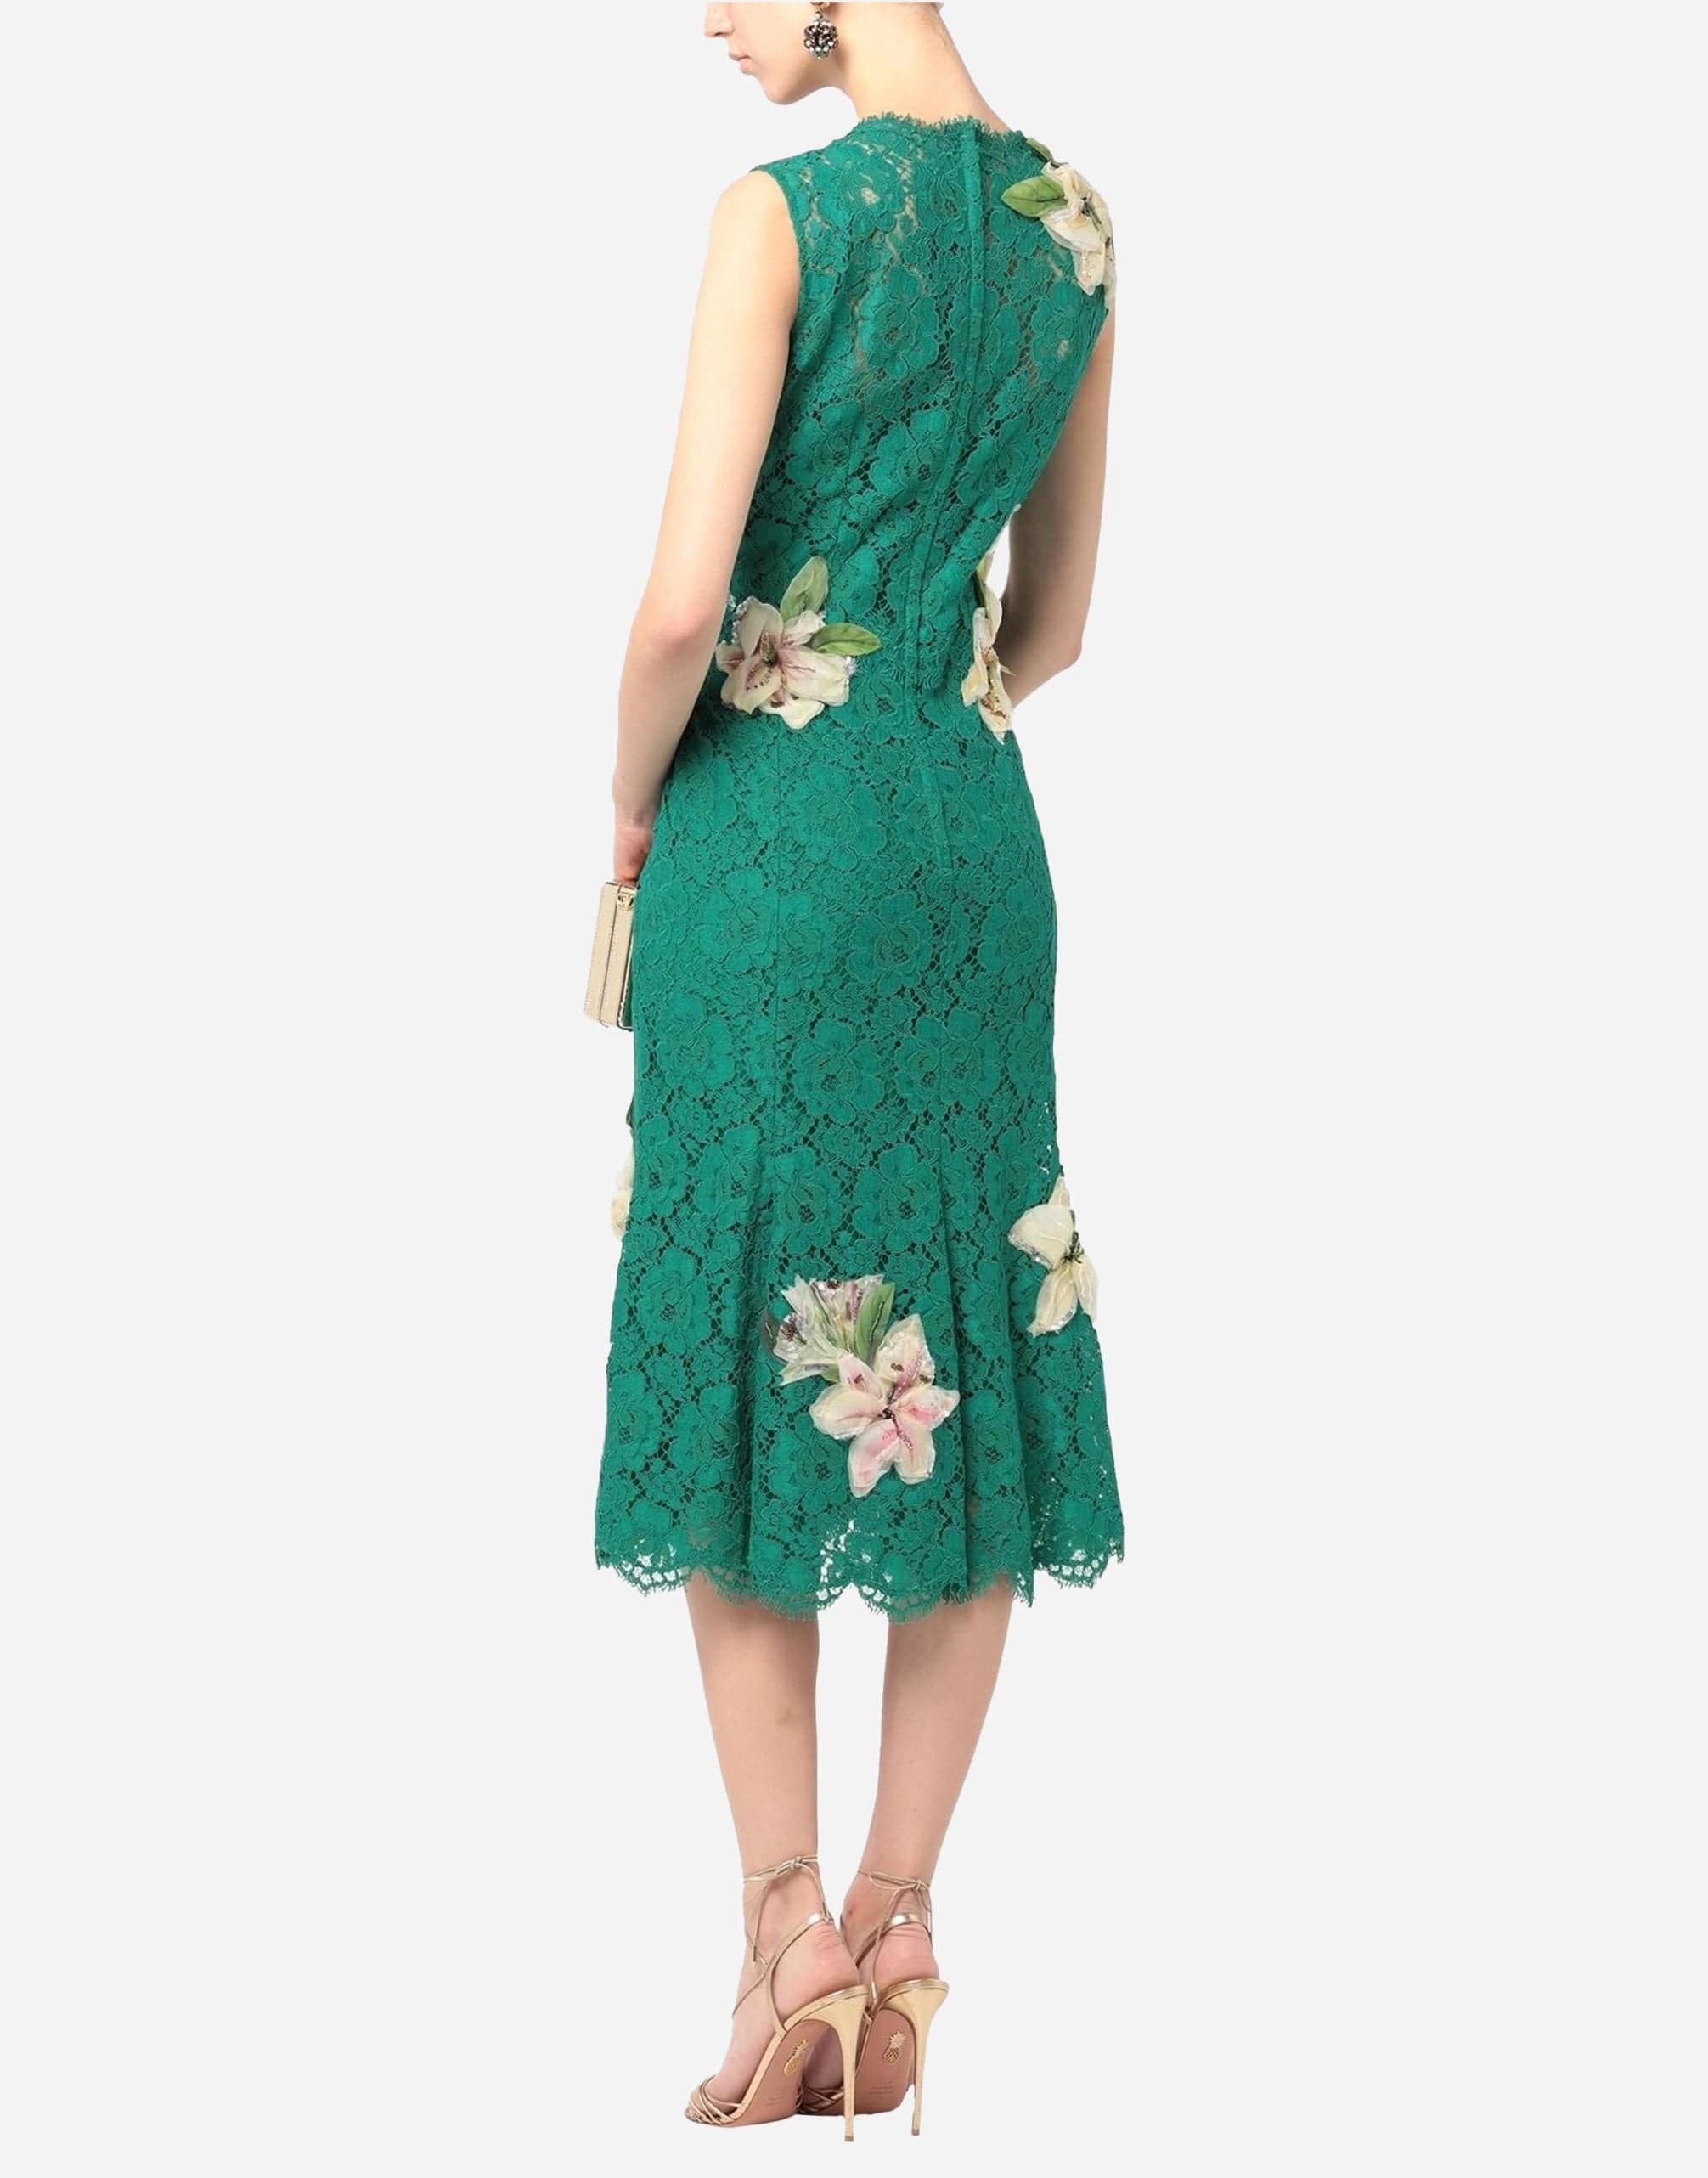 Dolce & Gabbana Lace Floral Appliqued Sleeveless Dress